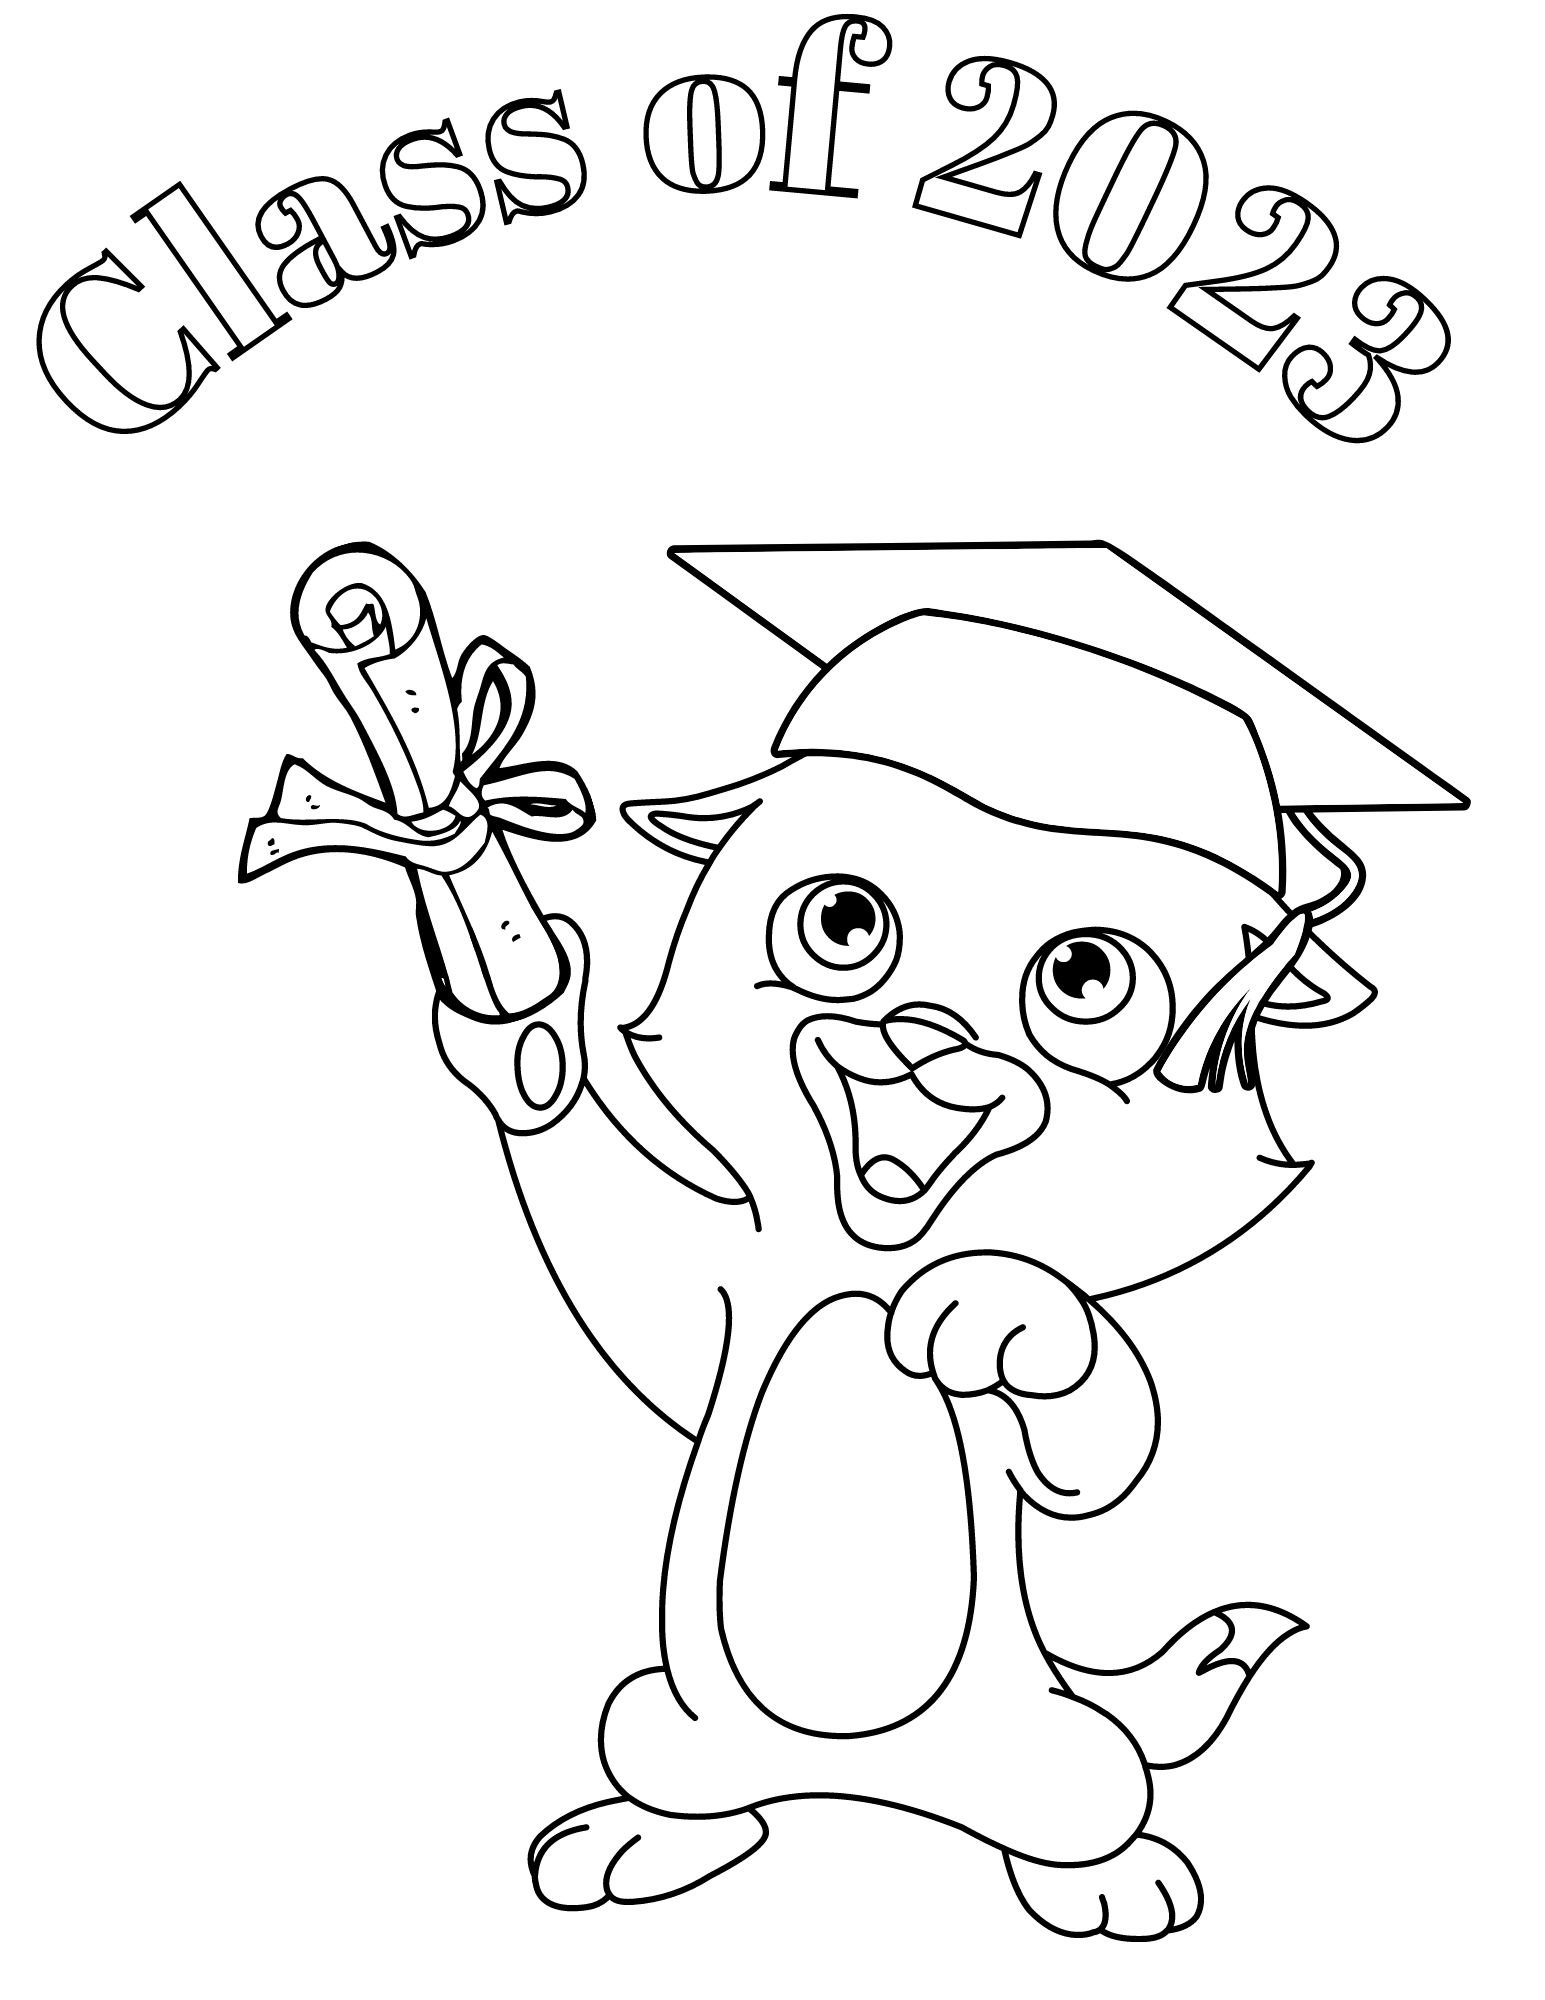 Graduation coloring pages graduation pdf graduation printables graduation coloring sheets class of coloring pages end of school